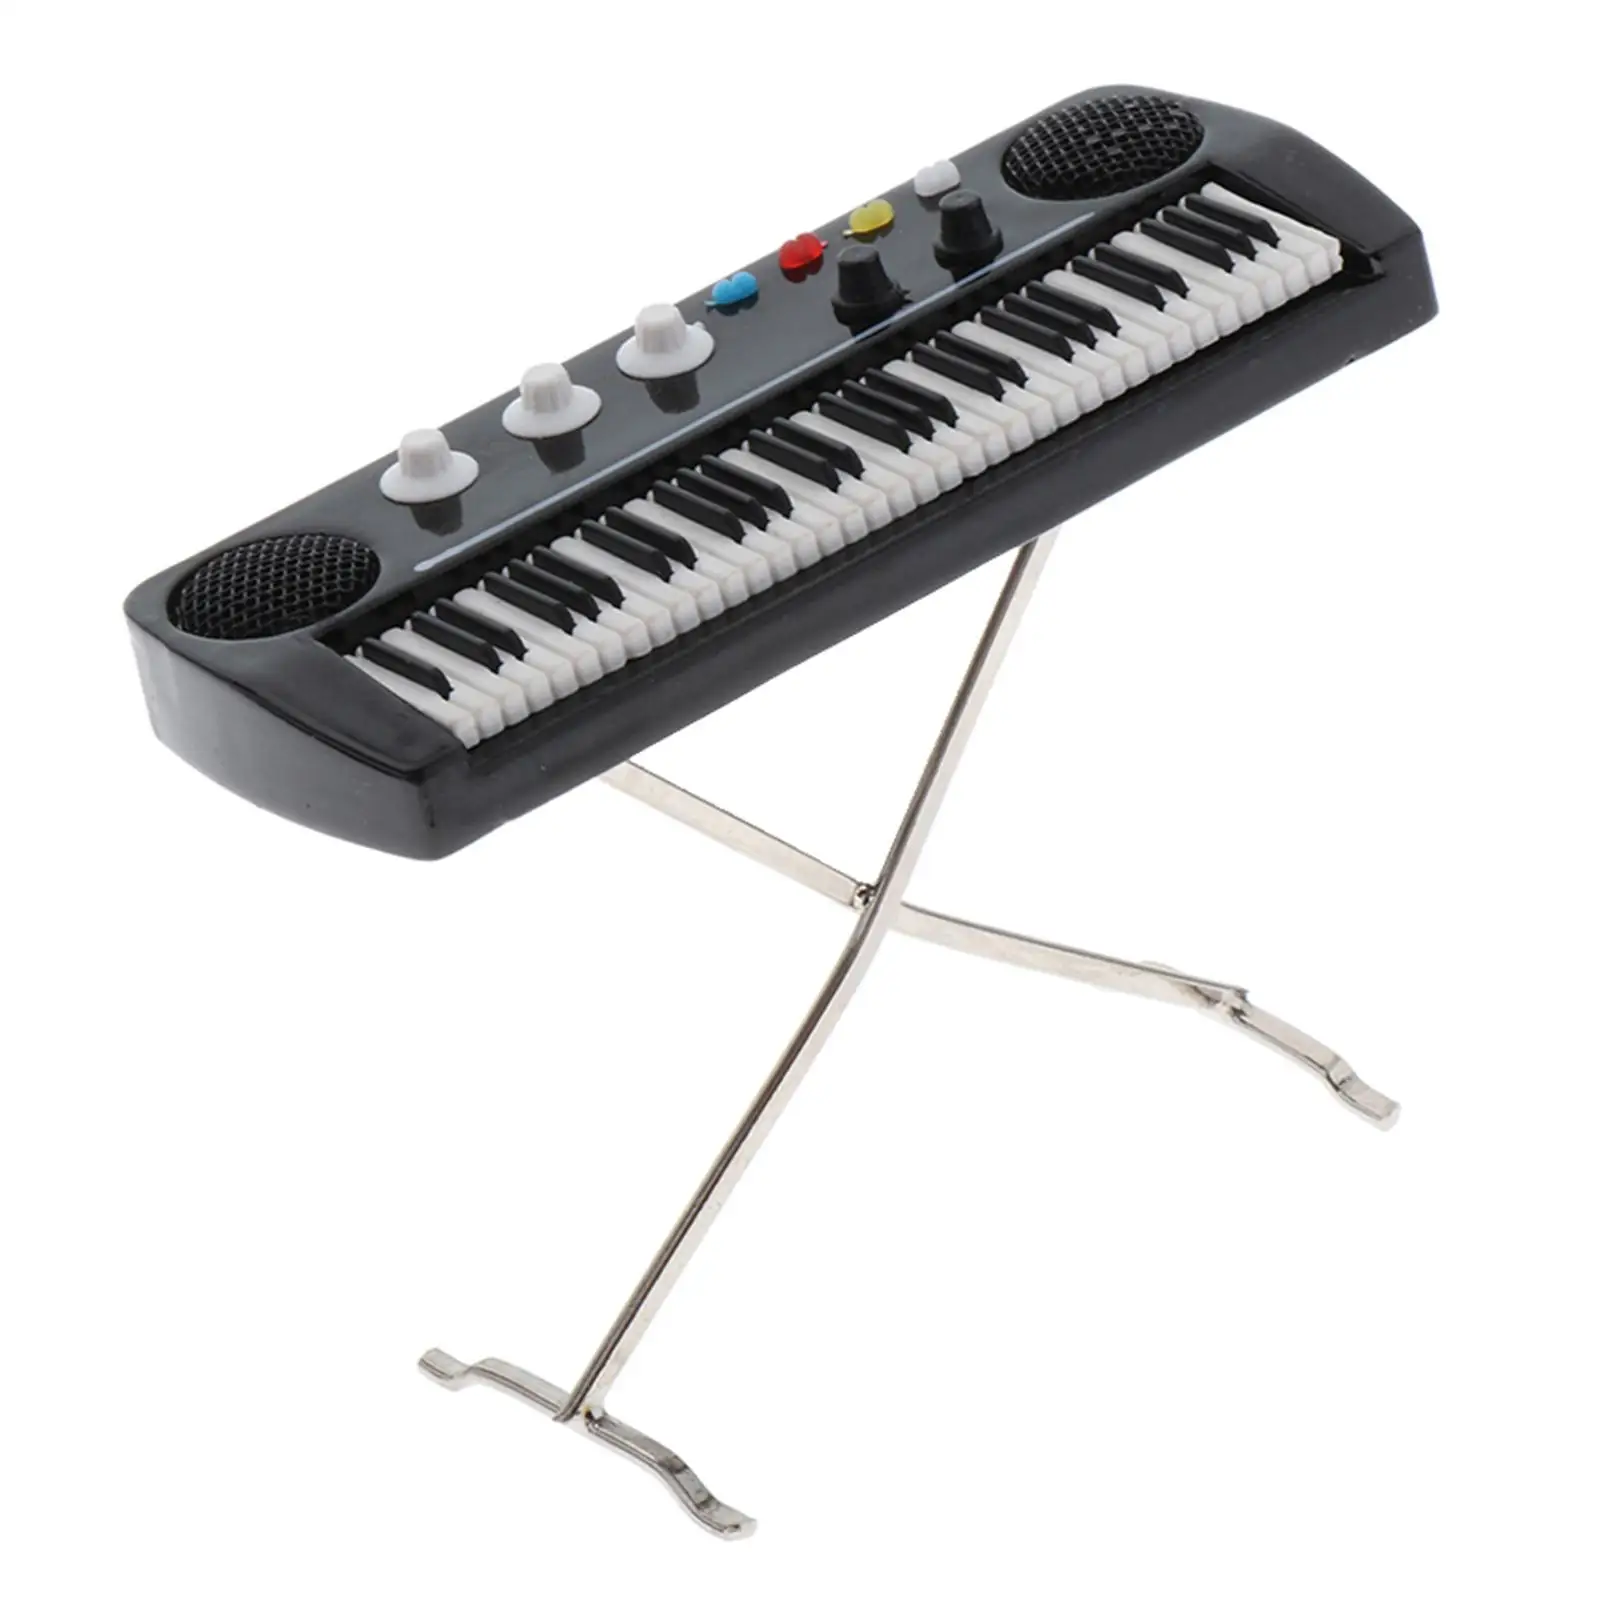 Miniature Electronic Organ Model / Music Stand Modeling for Decoration